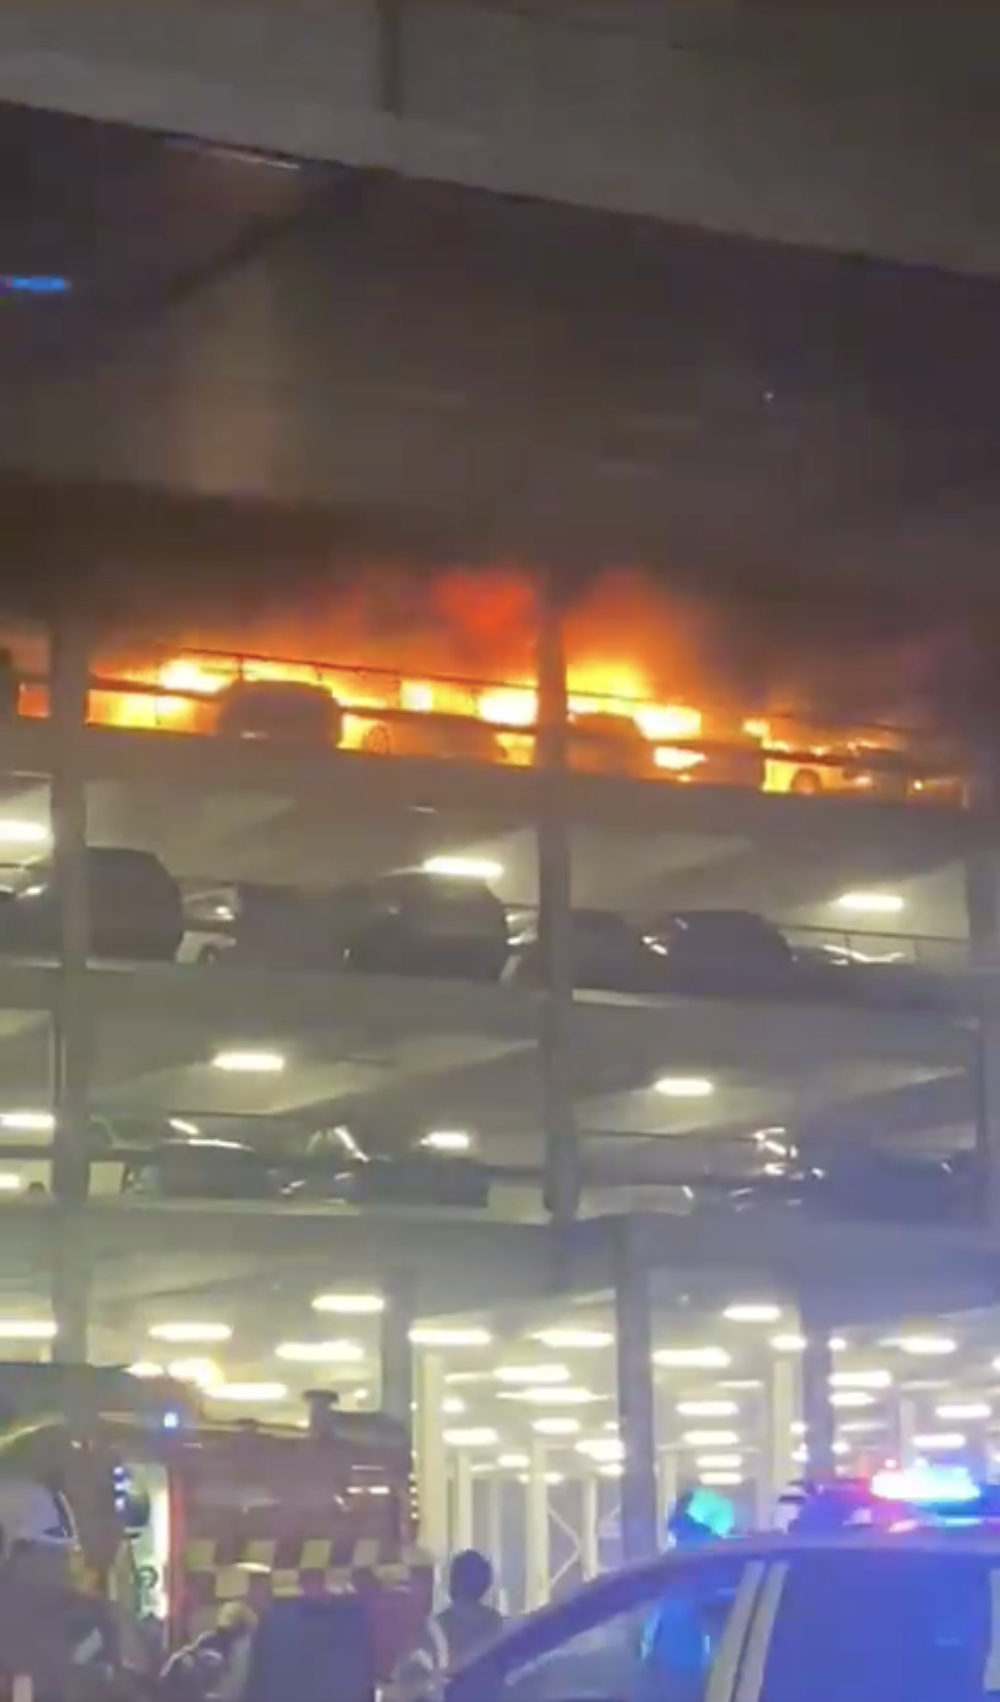 Luton Airport suspends flights as cars in parking lot catch fire: There are victims